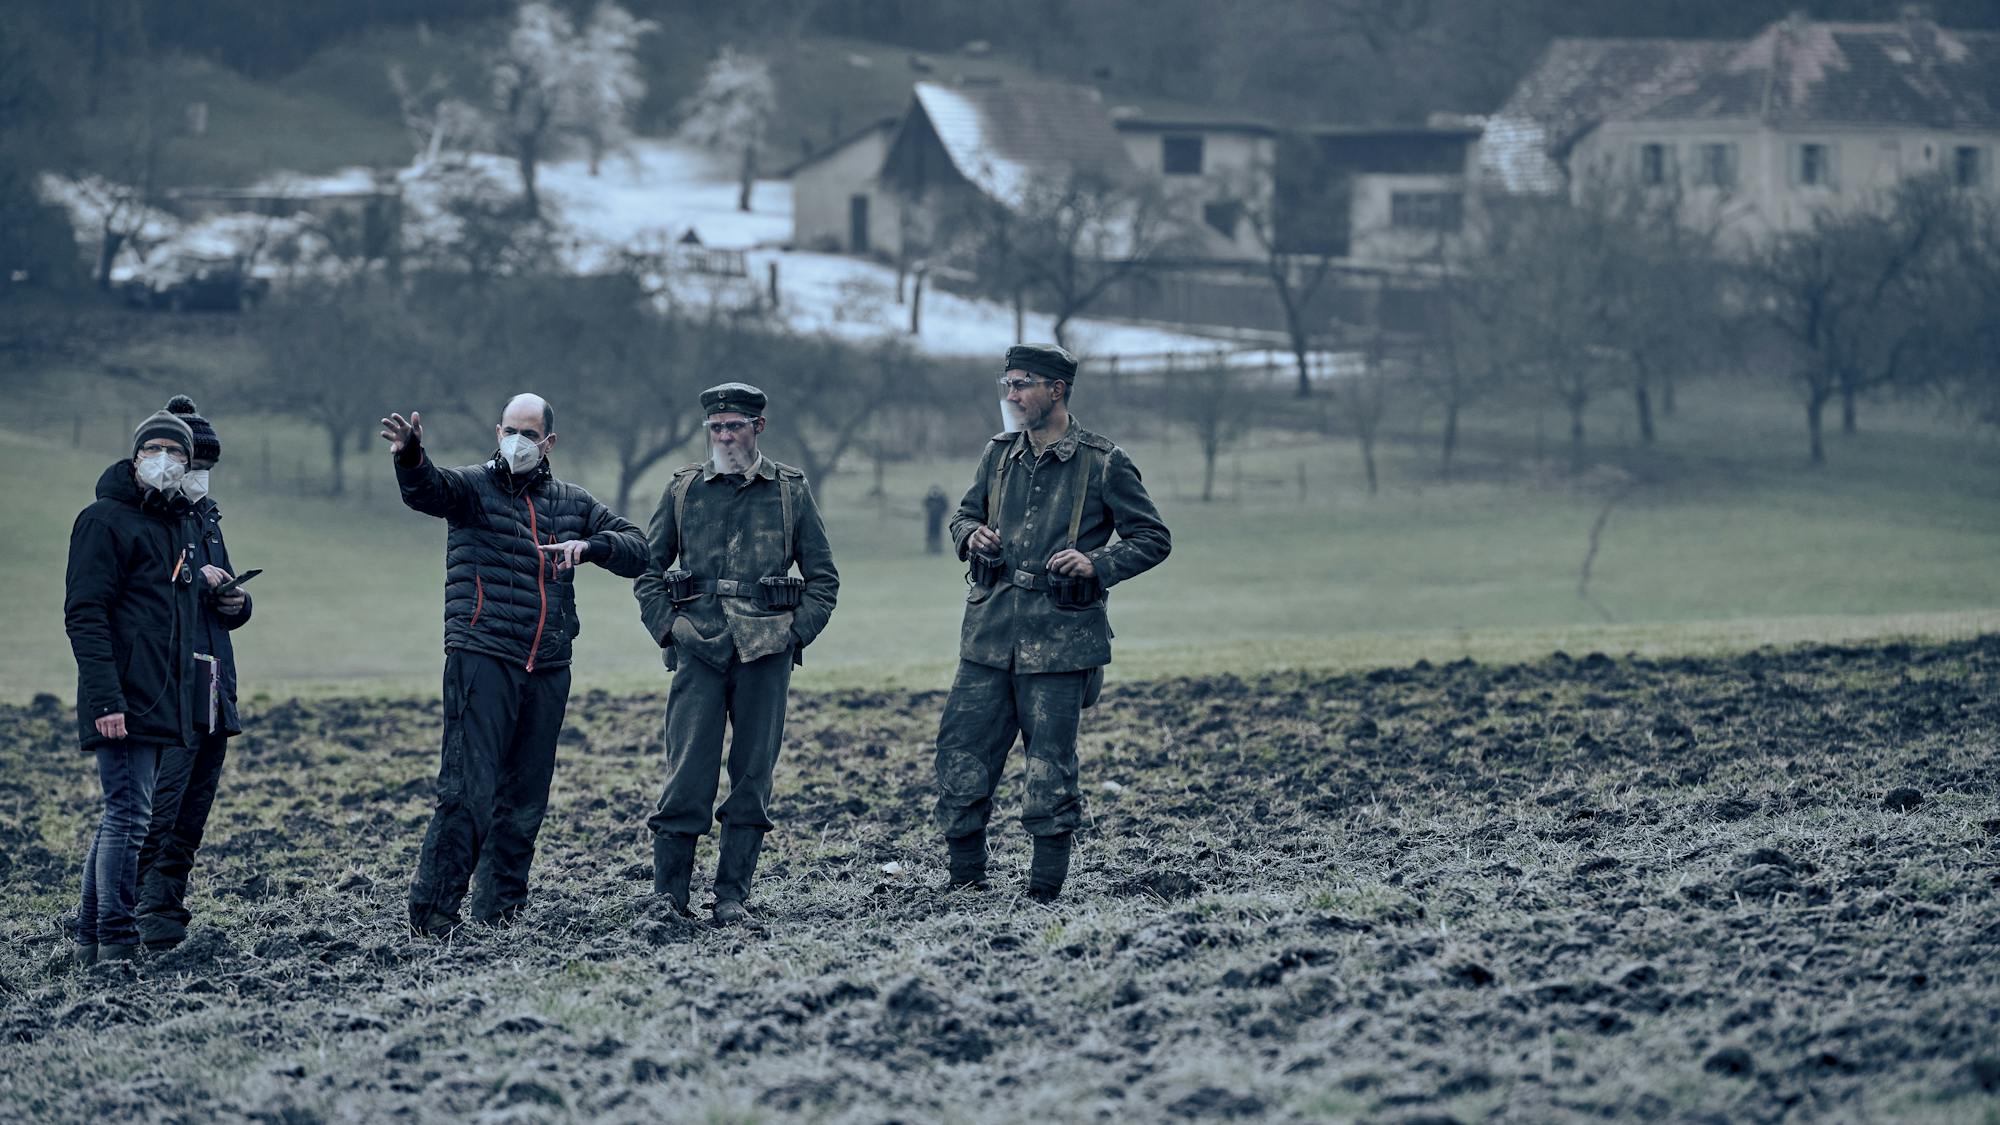 Director Edward Berger with actors Felix Kammerer and Albrecht Schuch stand together in a muddy field.